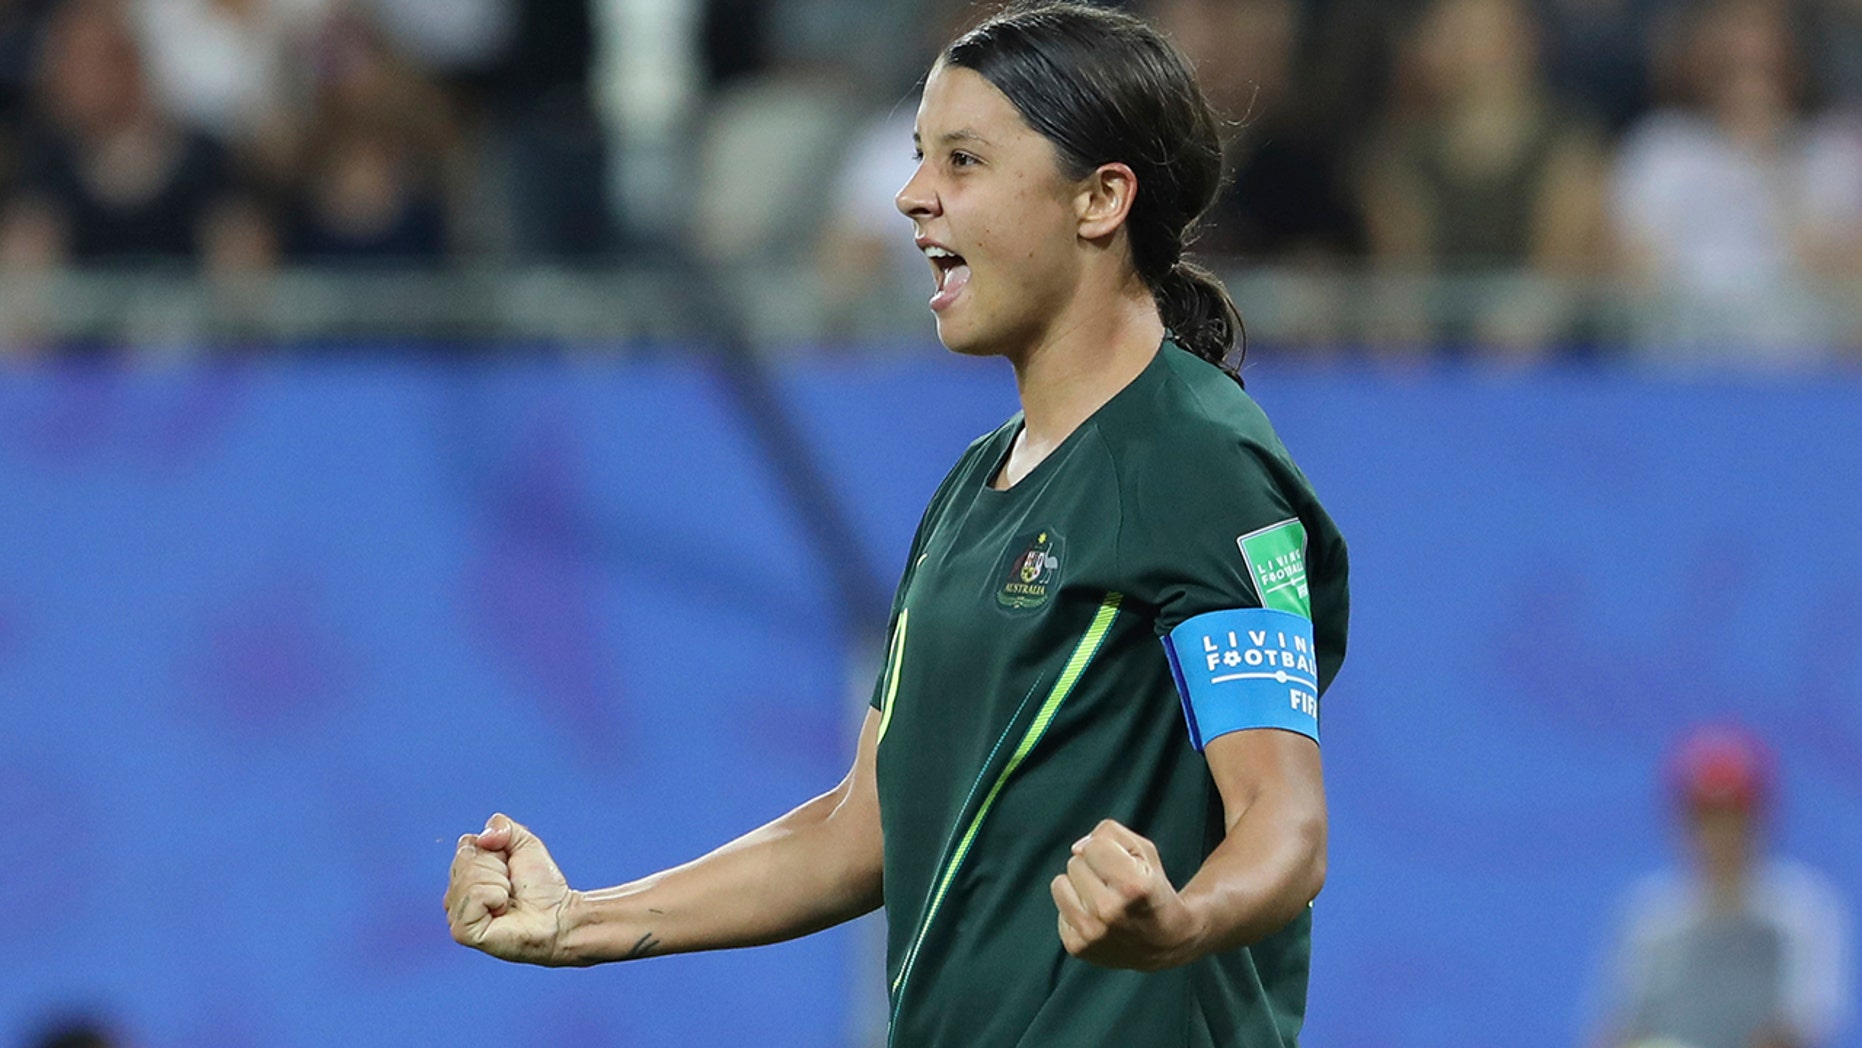 Australia's Sam Kerr celebrates after scoring her side's fourth goal during the Women's World Cup Group C soccer match between Jamaica and Australia at Stade des Alpes stadium in Grenoble, France, Tuesday, June 18, 2019. (AP Photo/Laurent Cipriani)